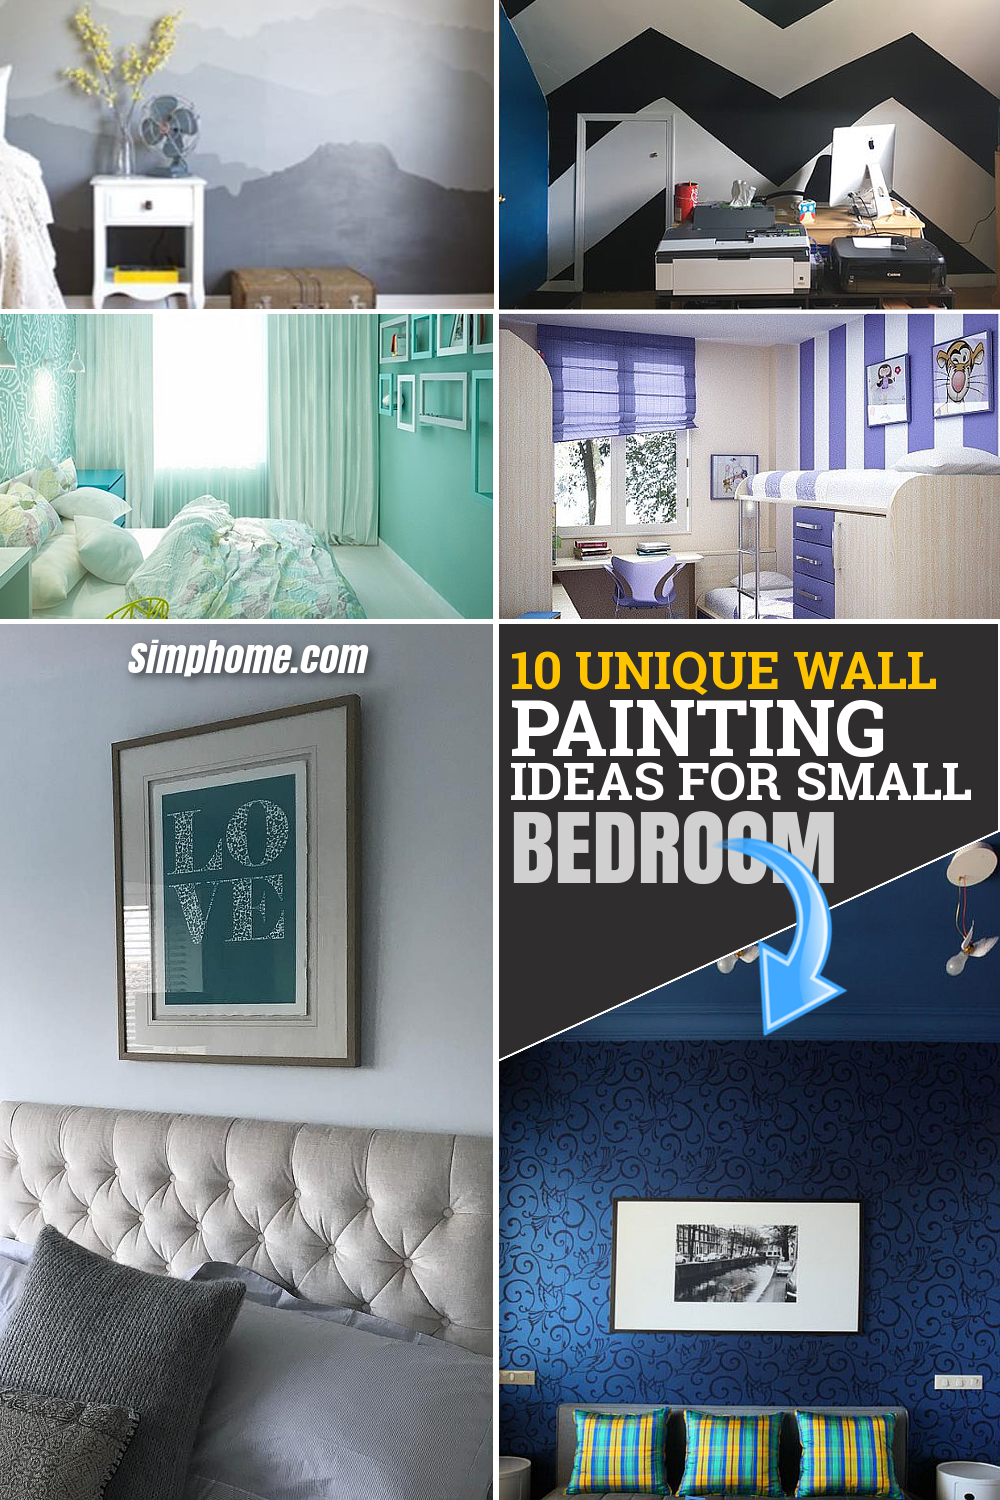 10 Unique Wall Painting Ideas for Small Bedroom via Simphome.com Featured Long Pinterest Image